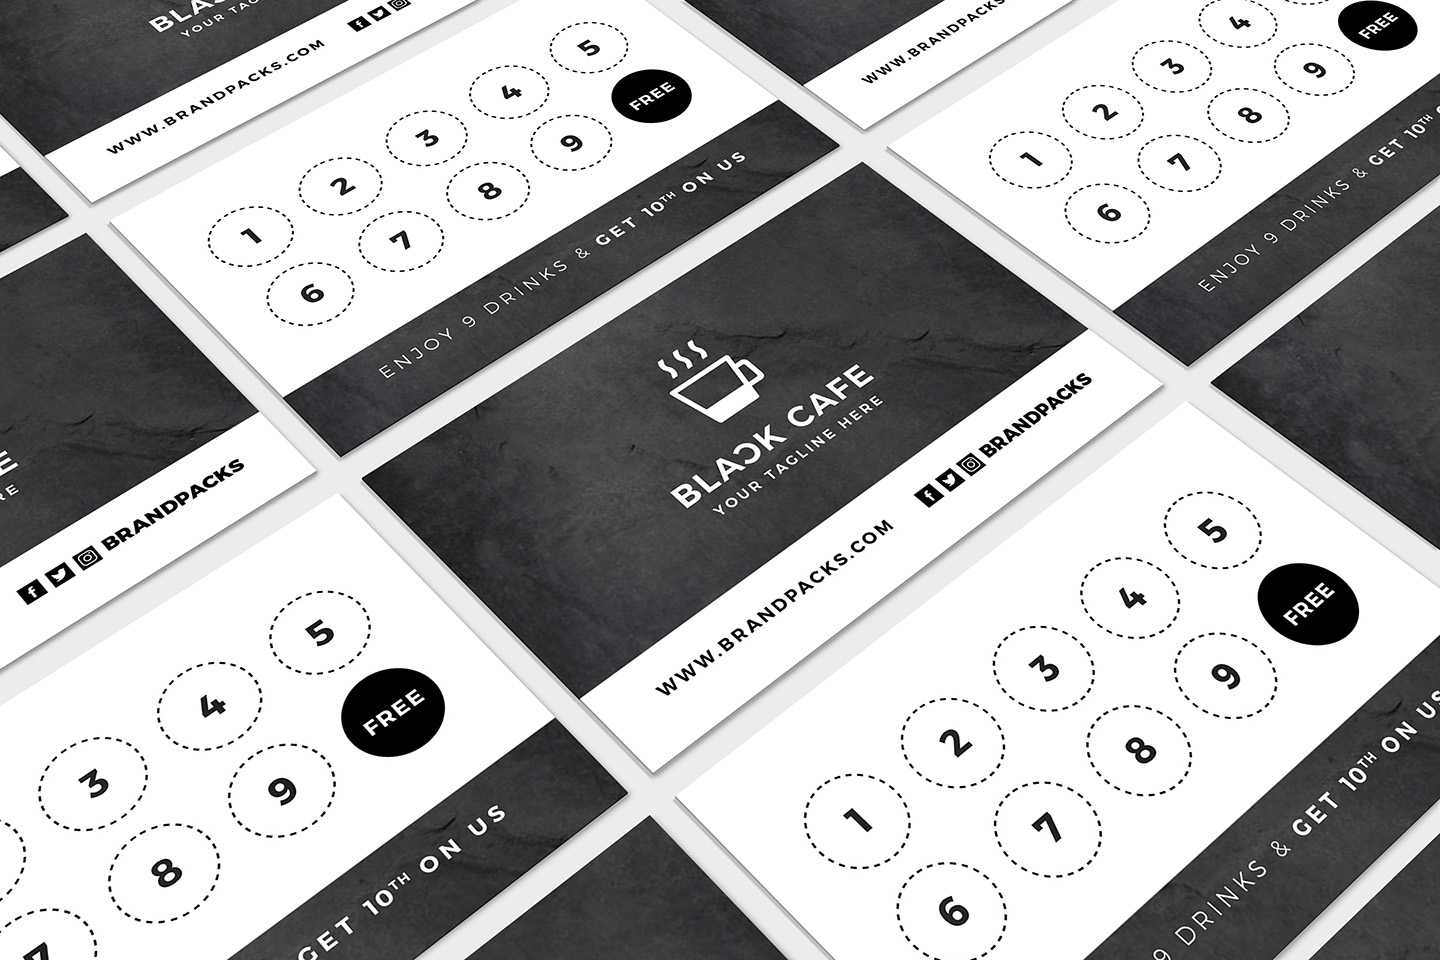 Free Loyalty Card Templates - Psd, Ai & Vector - Brandpacks In Loyalty Card Design Template